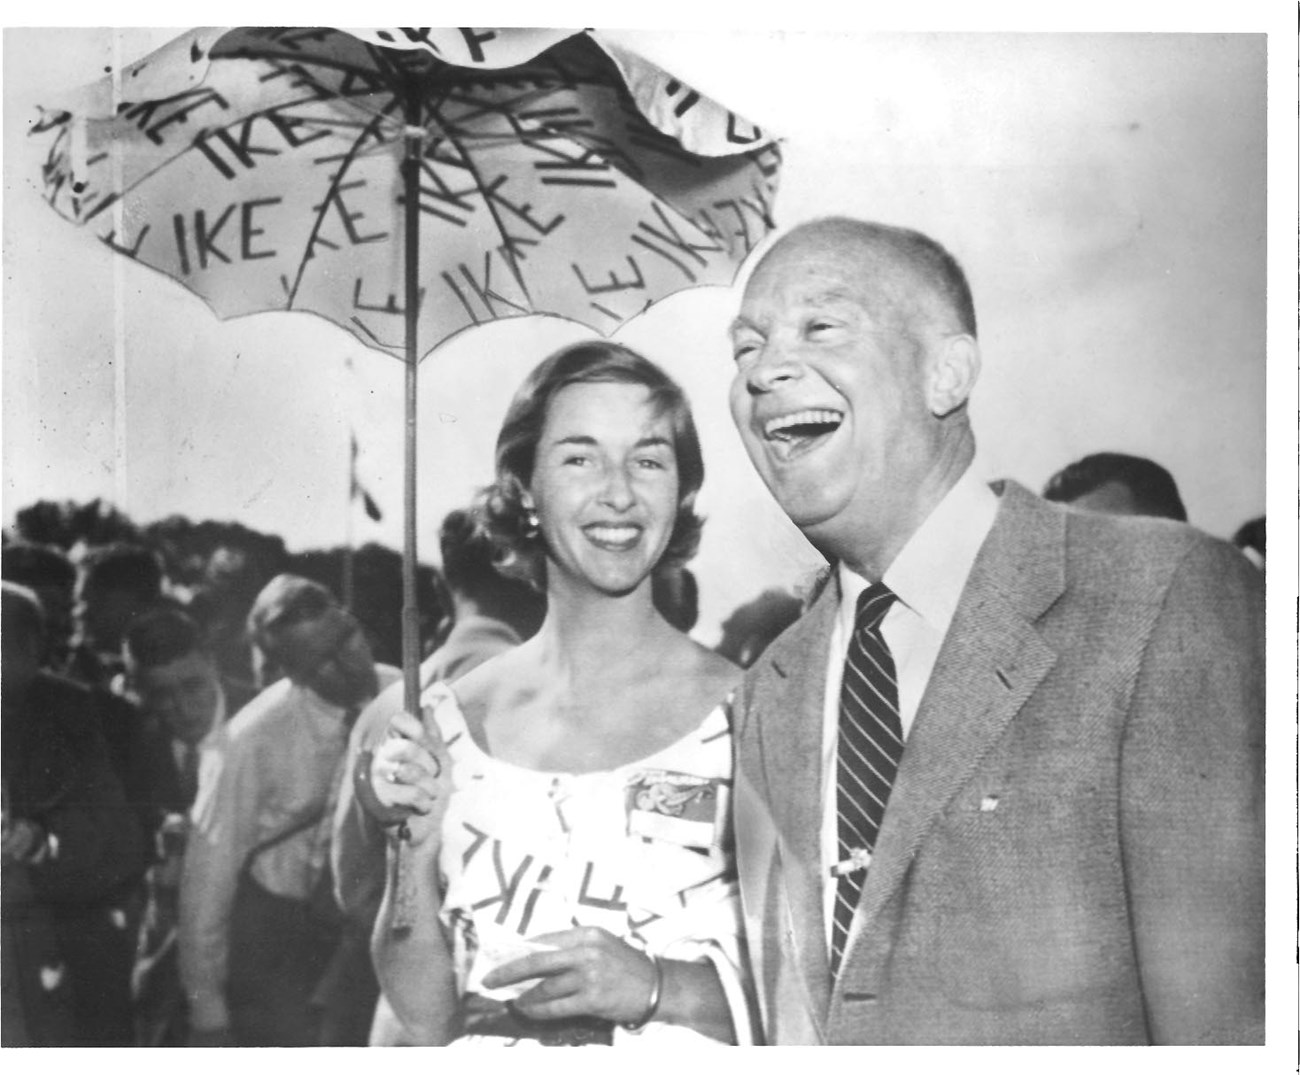 smiling woman holding umbrella stands next to laughing President Eisenhower